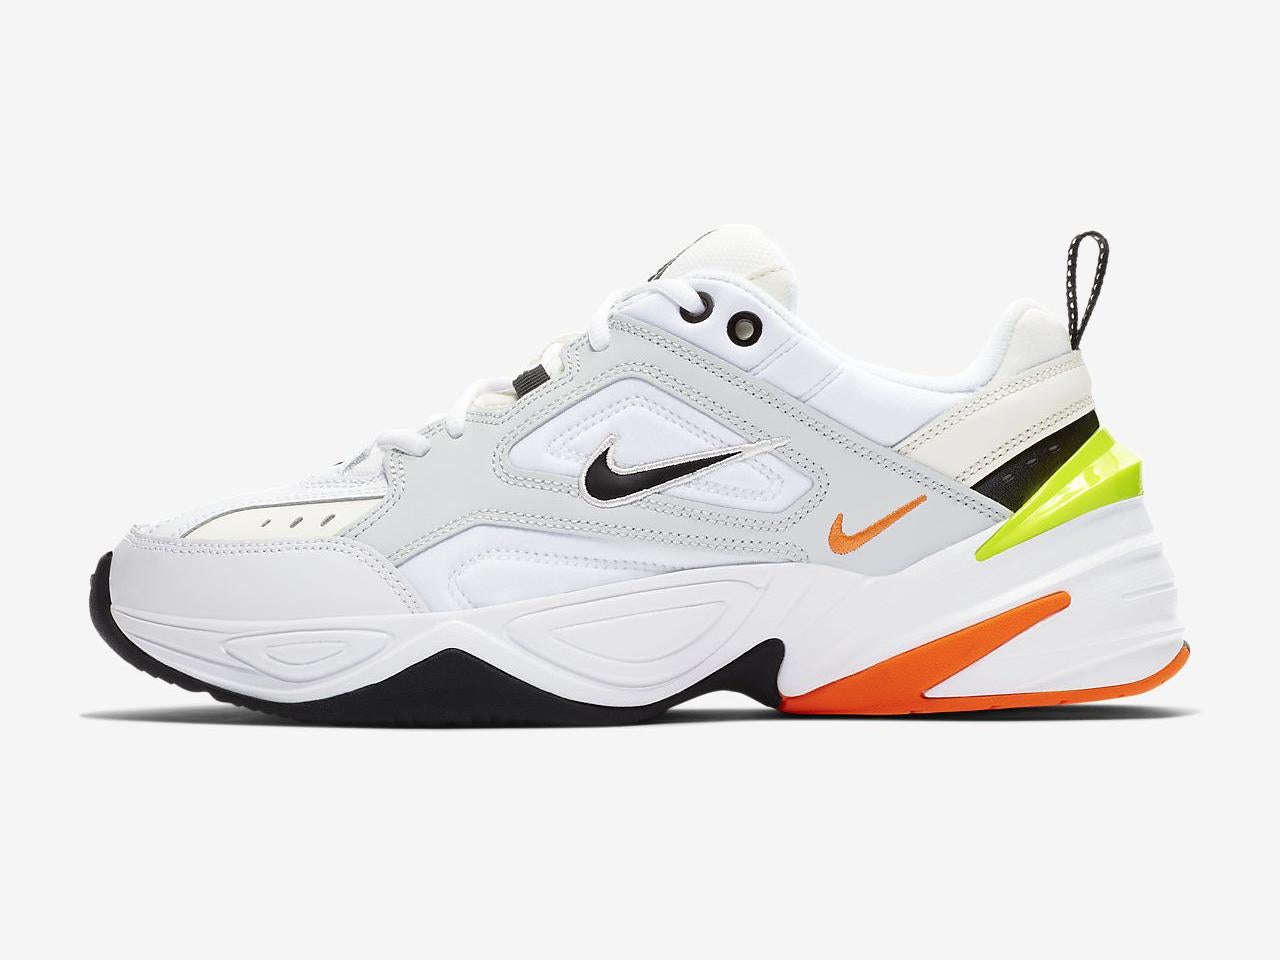 Dad trainers have been hailed as the most popular shoe of the year - Nike M2K Tekno Trainers In White, £90, ASOS